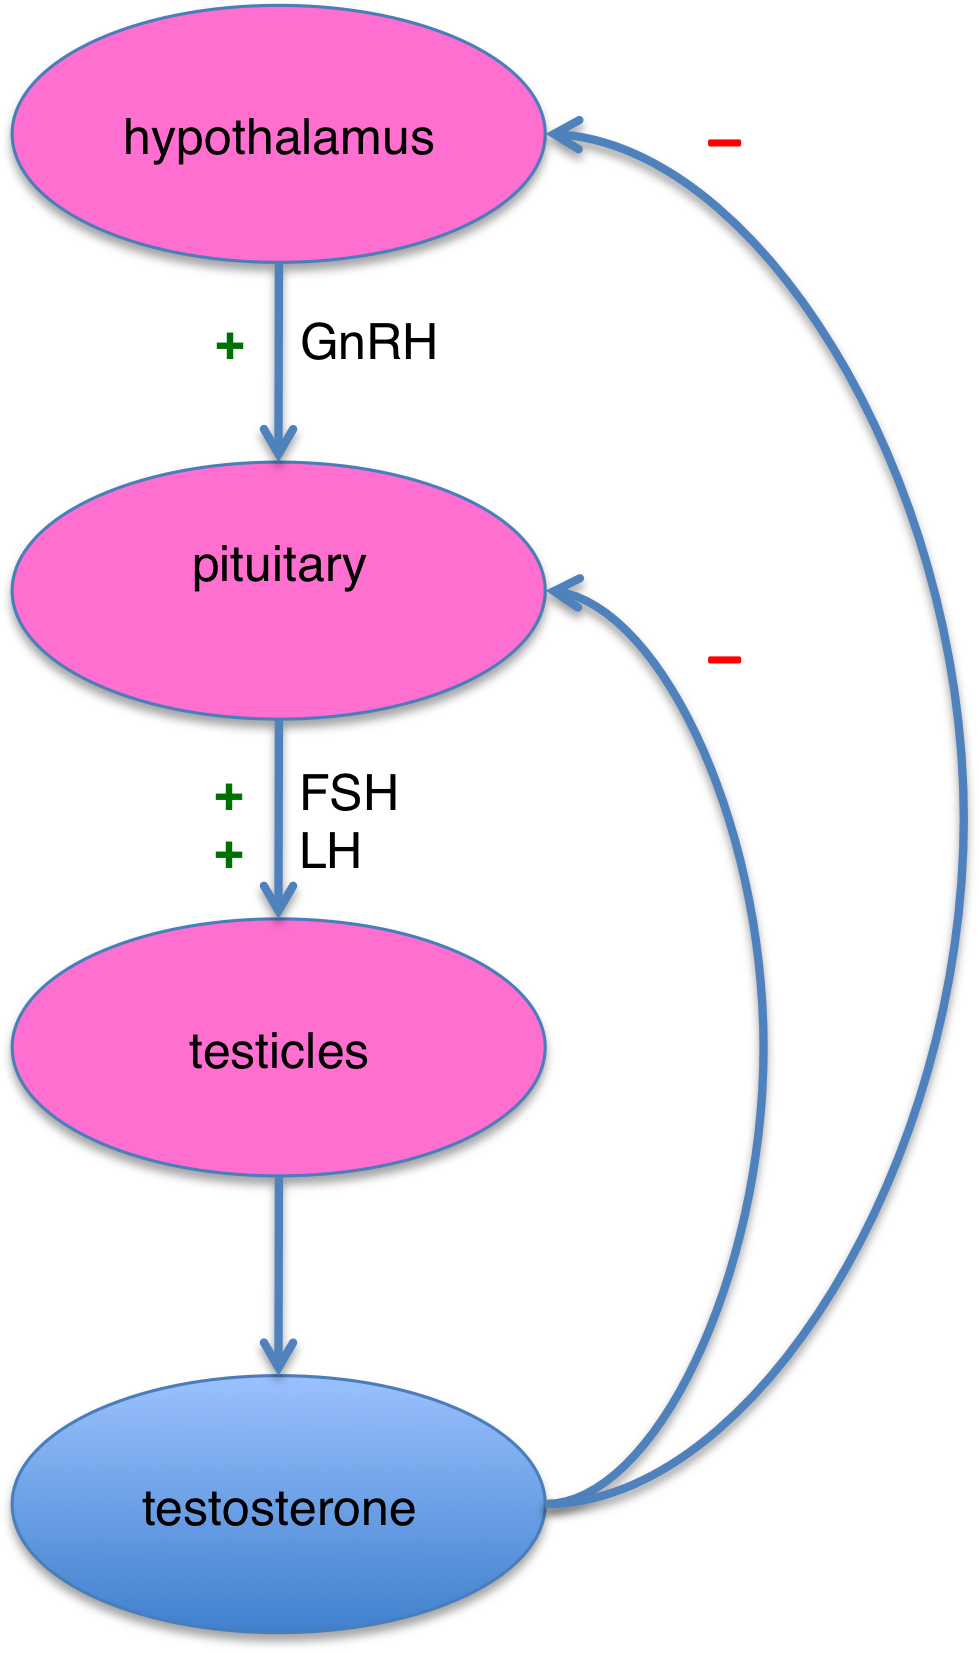 File:Hypothalamus pituitary testicles axis.png